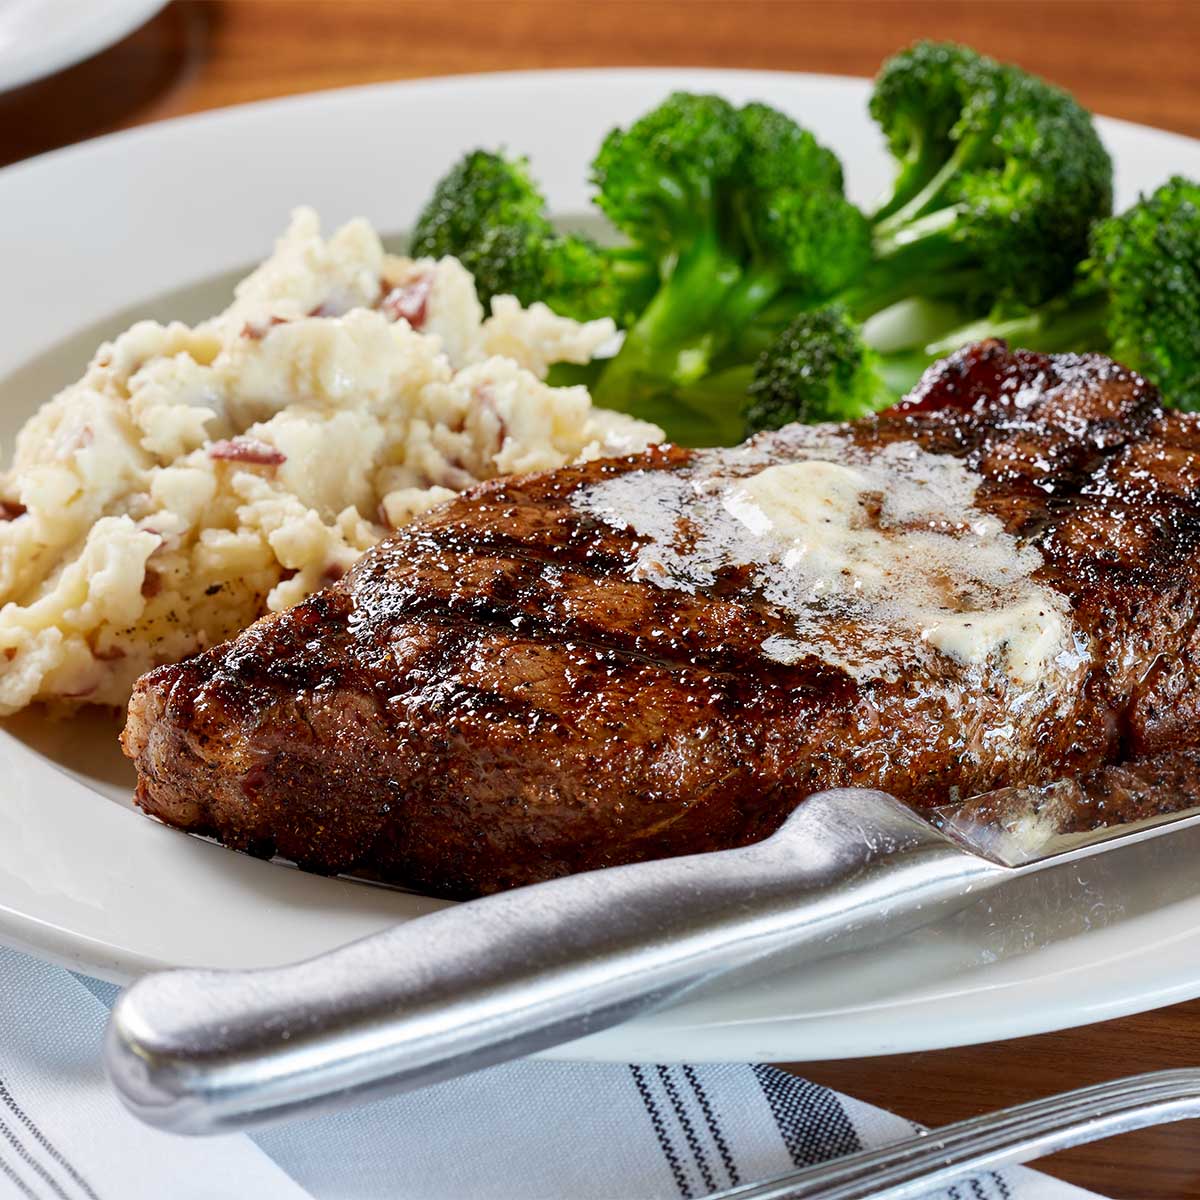 New York strip steak with mashed potatoes and broccoli at Burtons Gaithersburg location